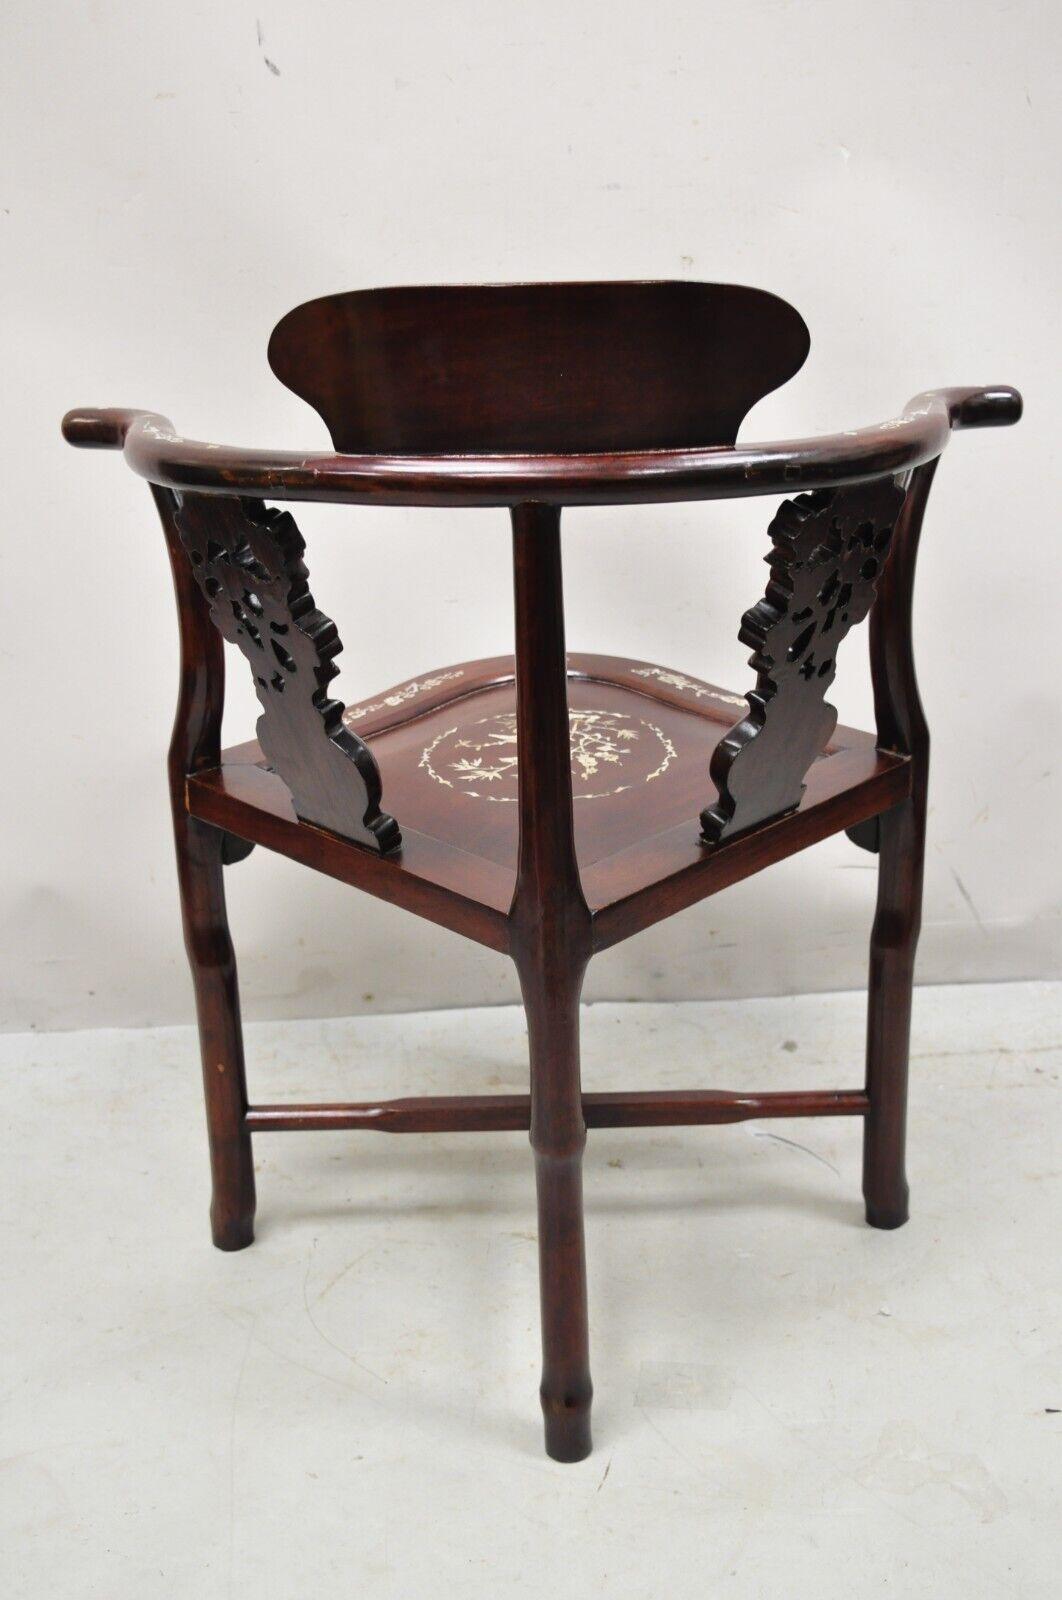 Vintage Chinese Carved Hardwood Corner Lounge Chair with Mother of Pearl Inlay For Sale 4